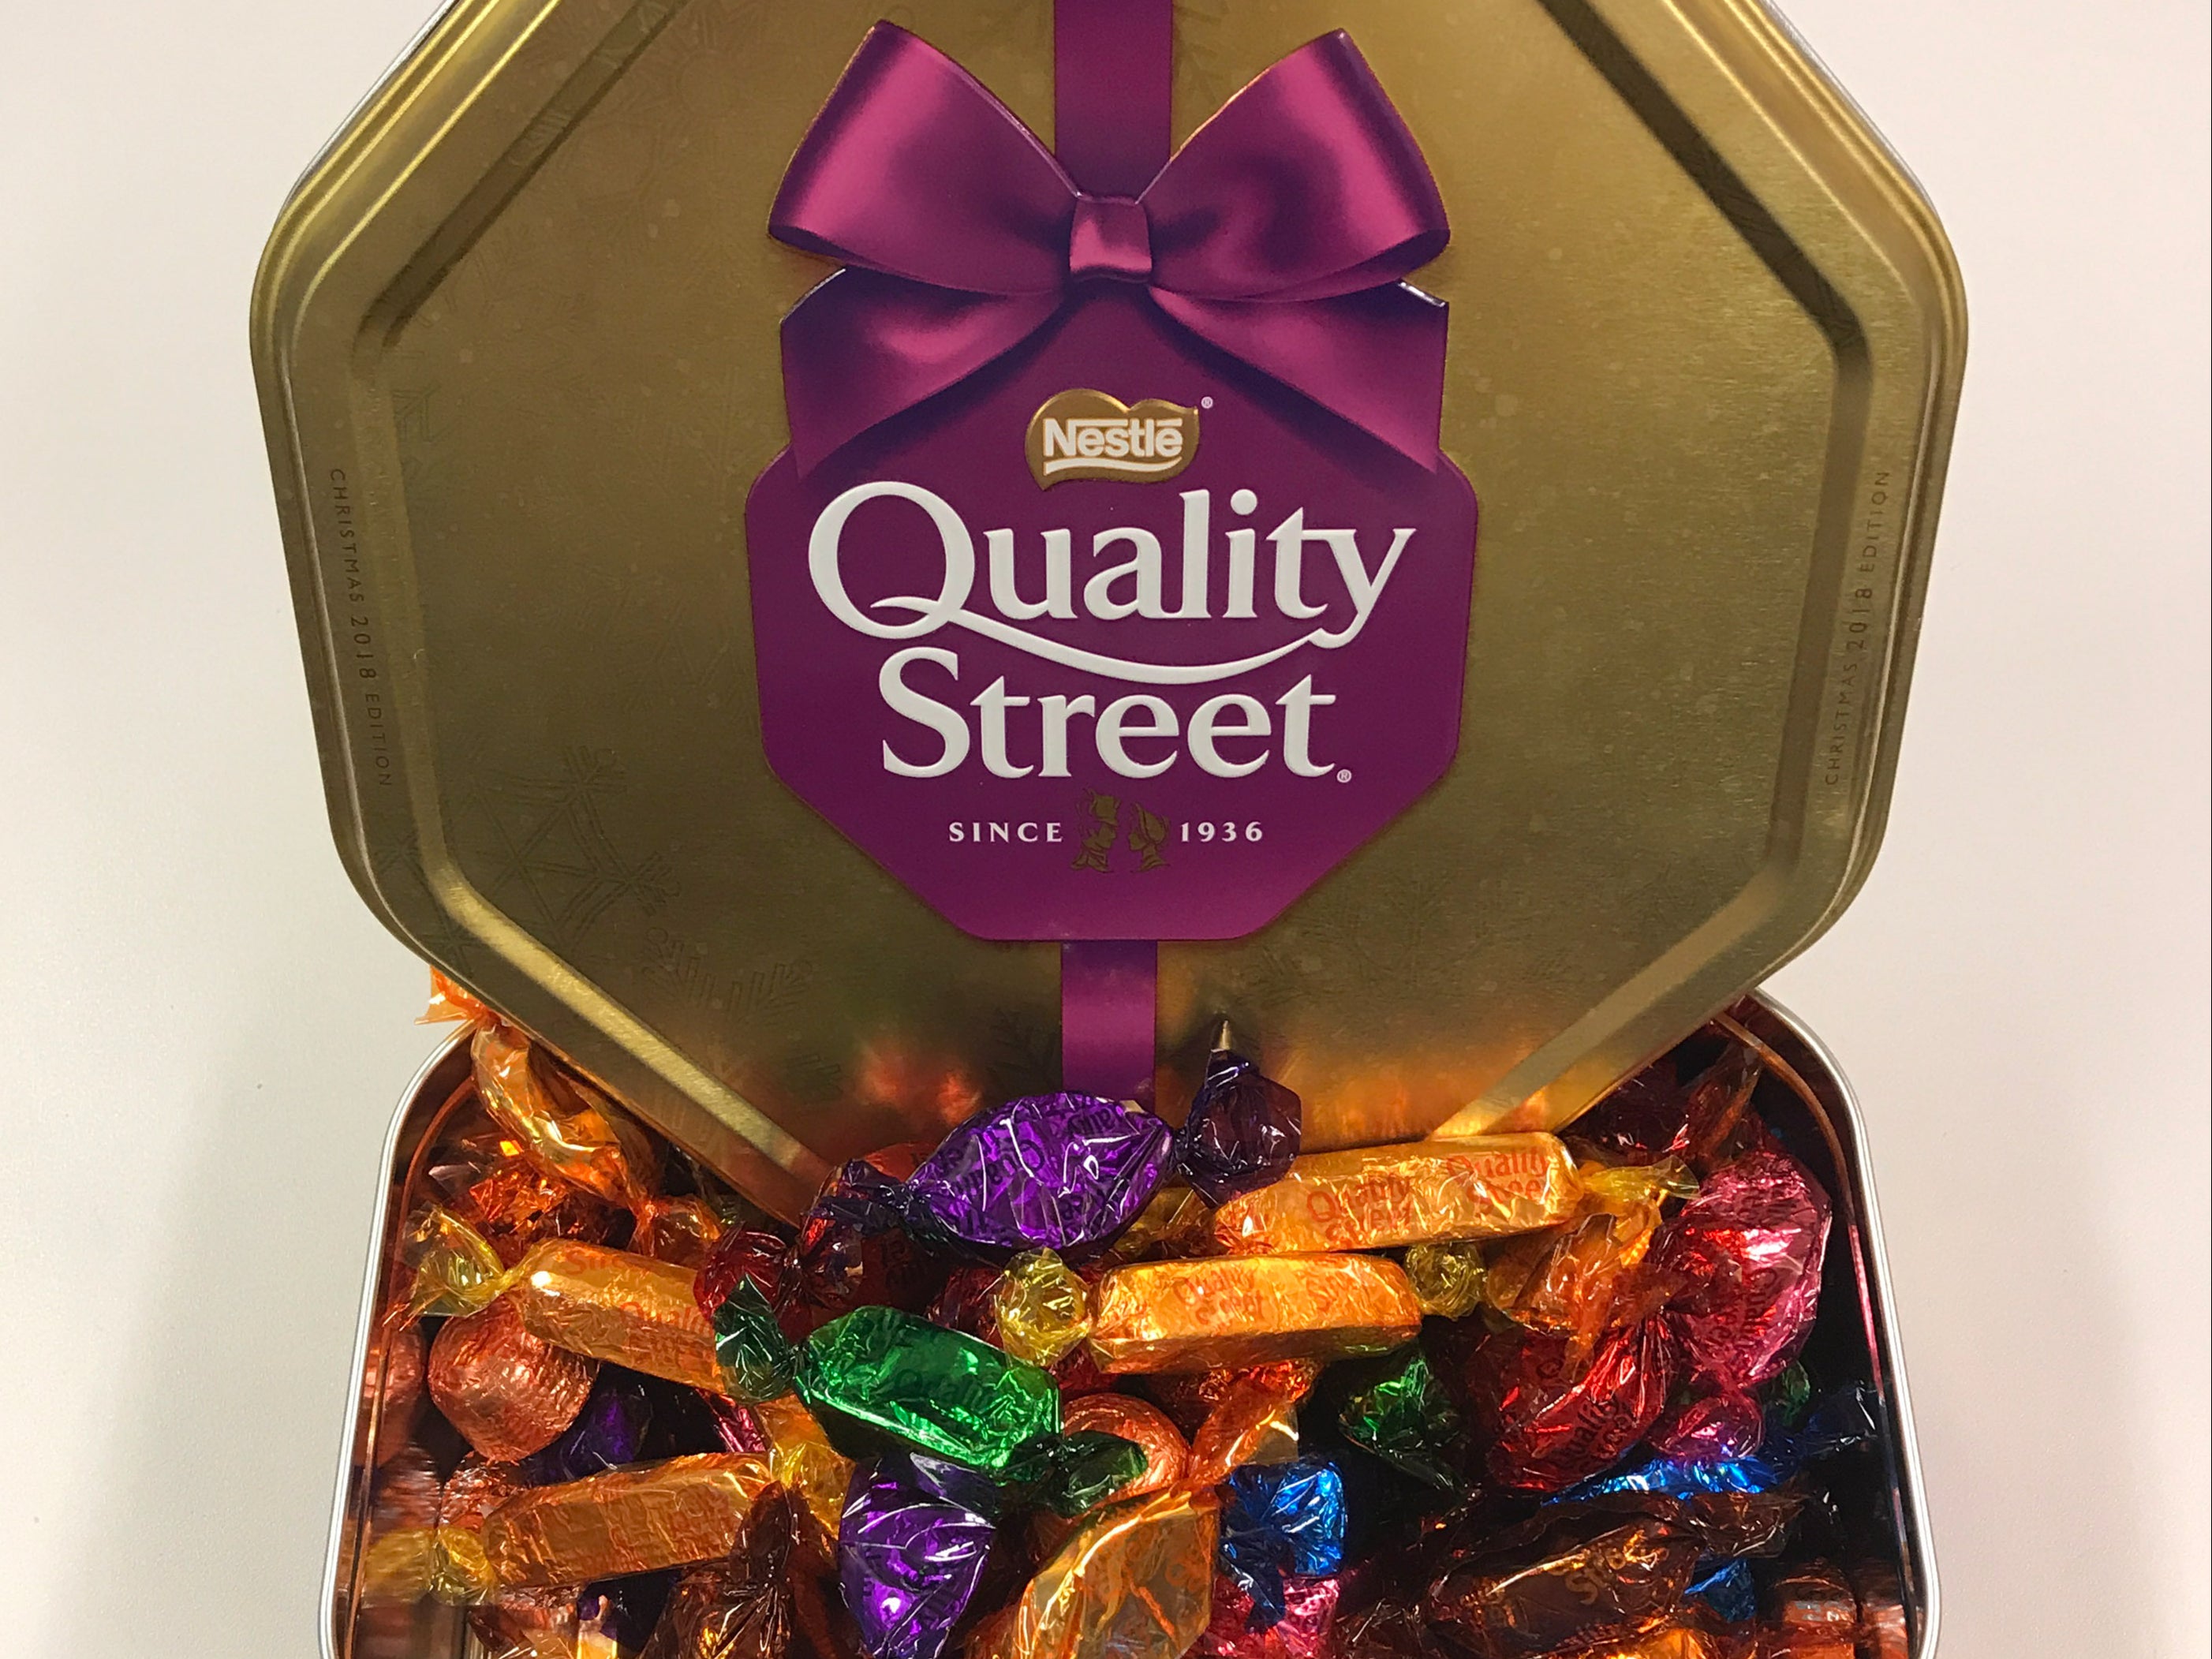 The makers of Quality Street have been affected by the ongoing chronic HGV driver shortage